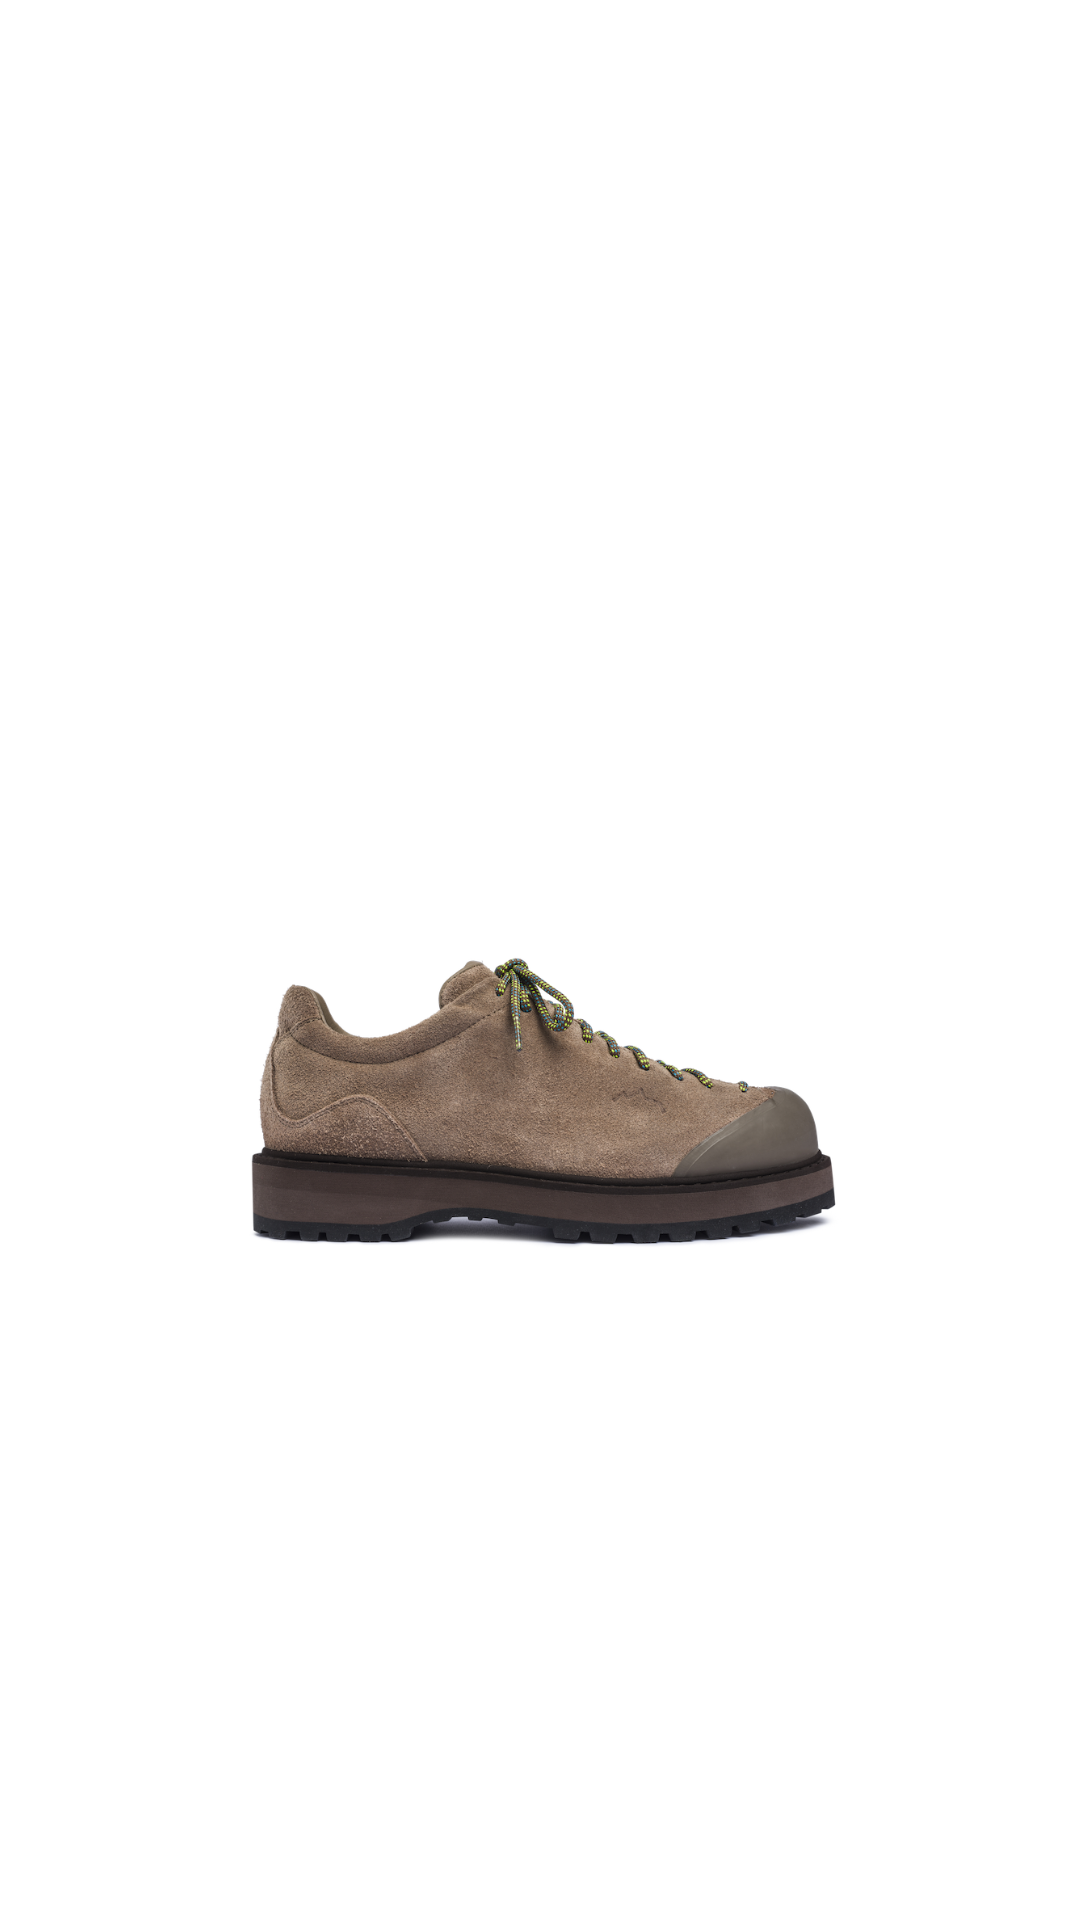 Ampezzo Taupe Suede by Diemme